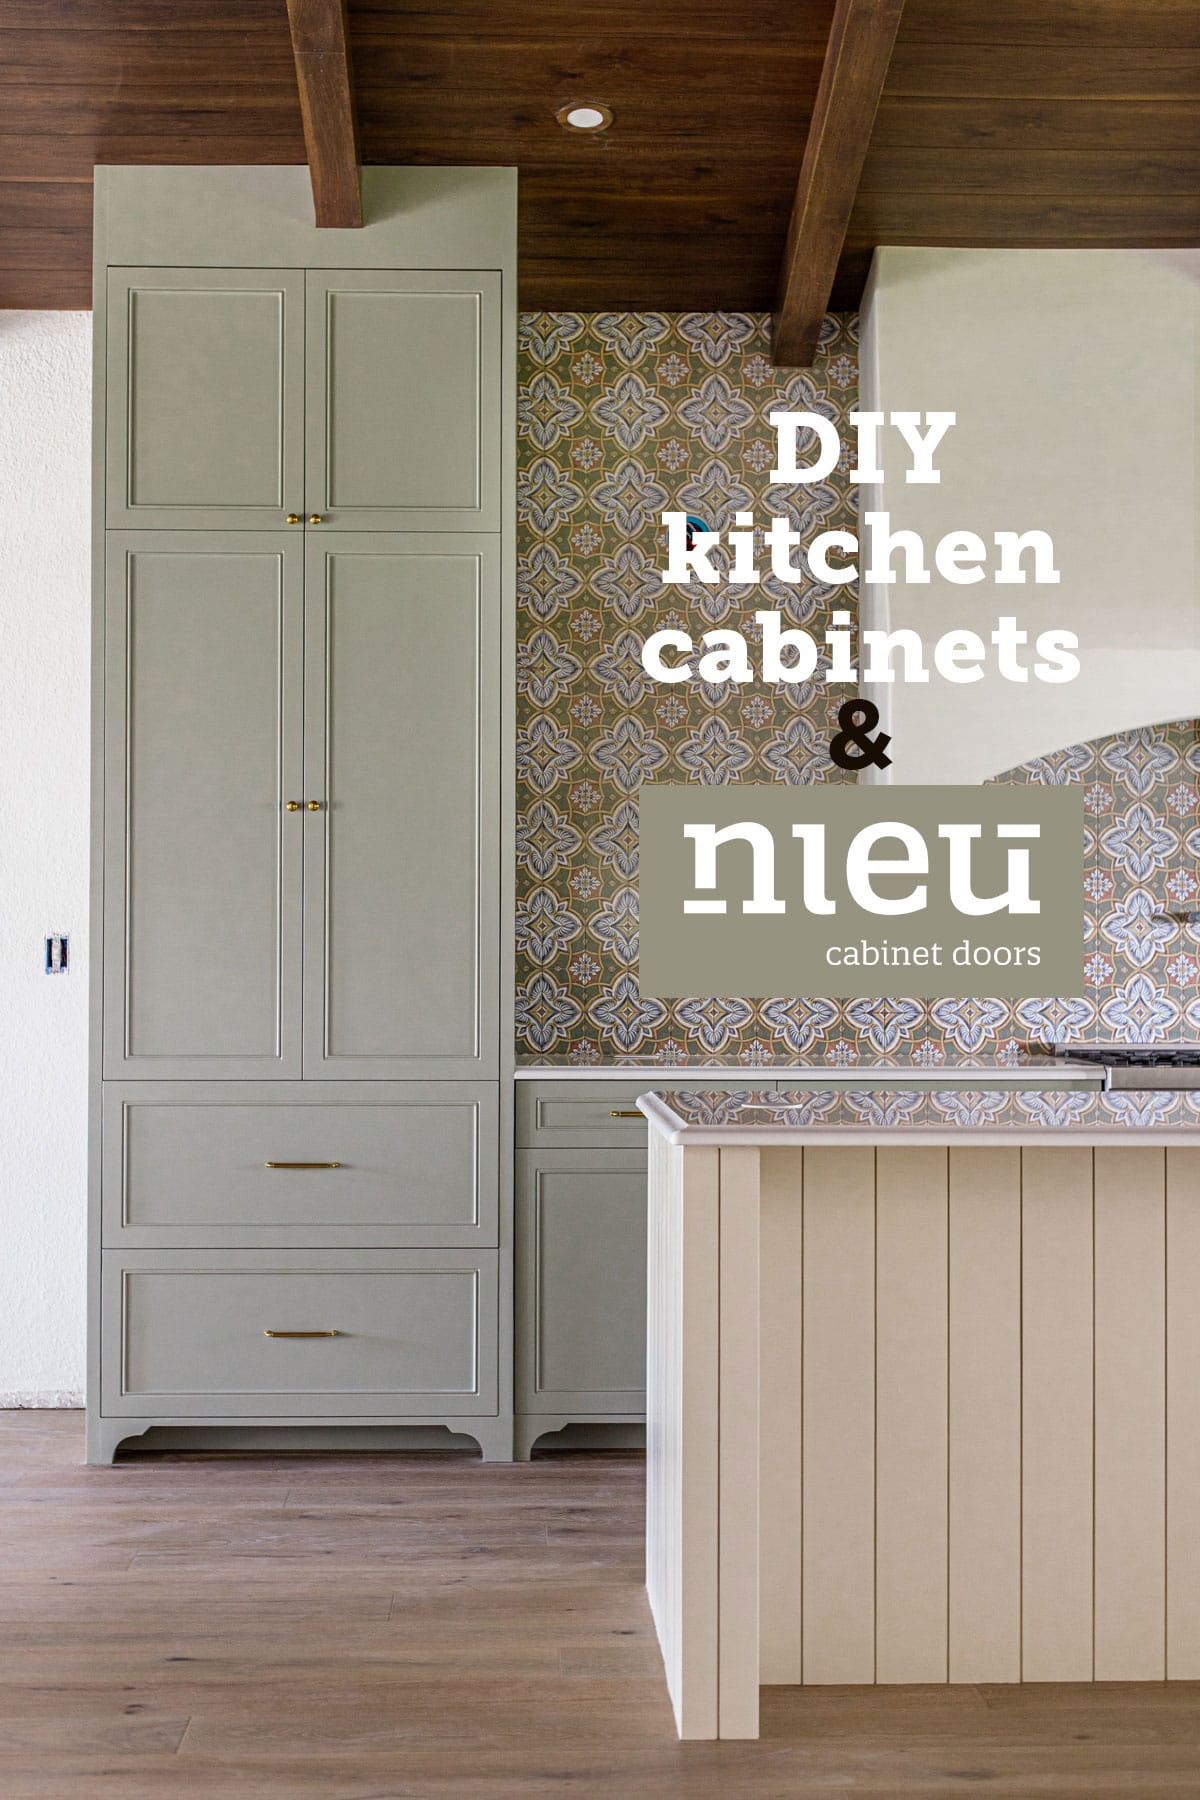 DIY Kitchen Cabinets Reveal with Nieu Cabinet Doors   Jenna Sue Design